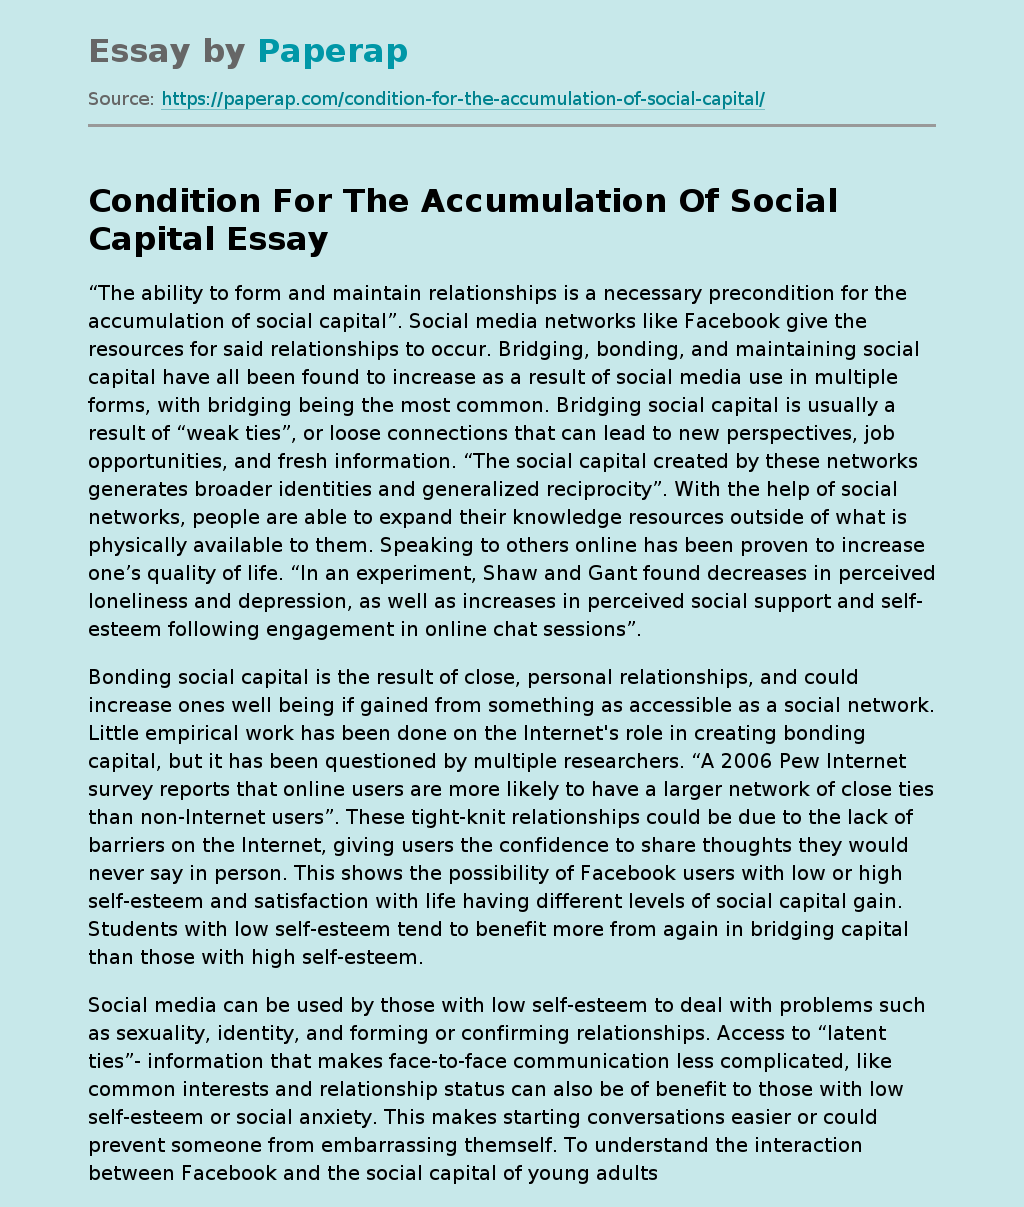 Condition For The Accumulation Of Social Capital